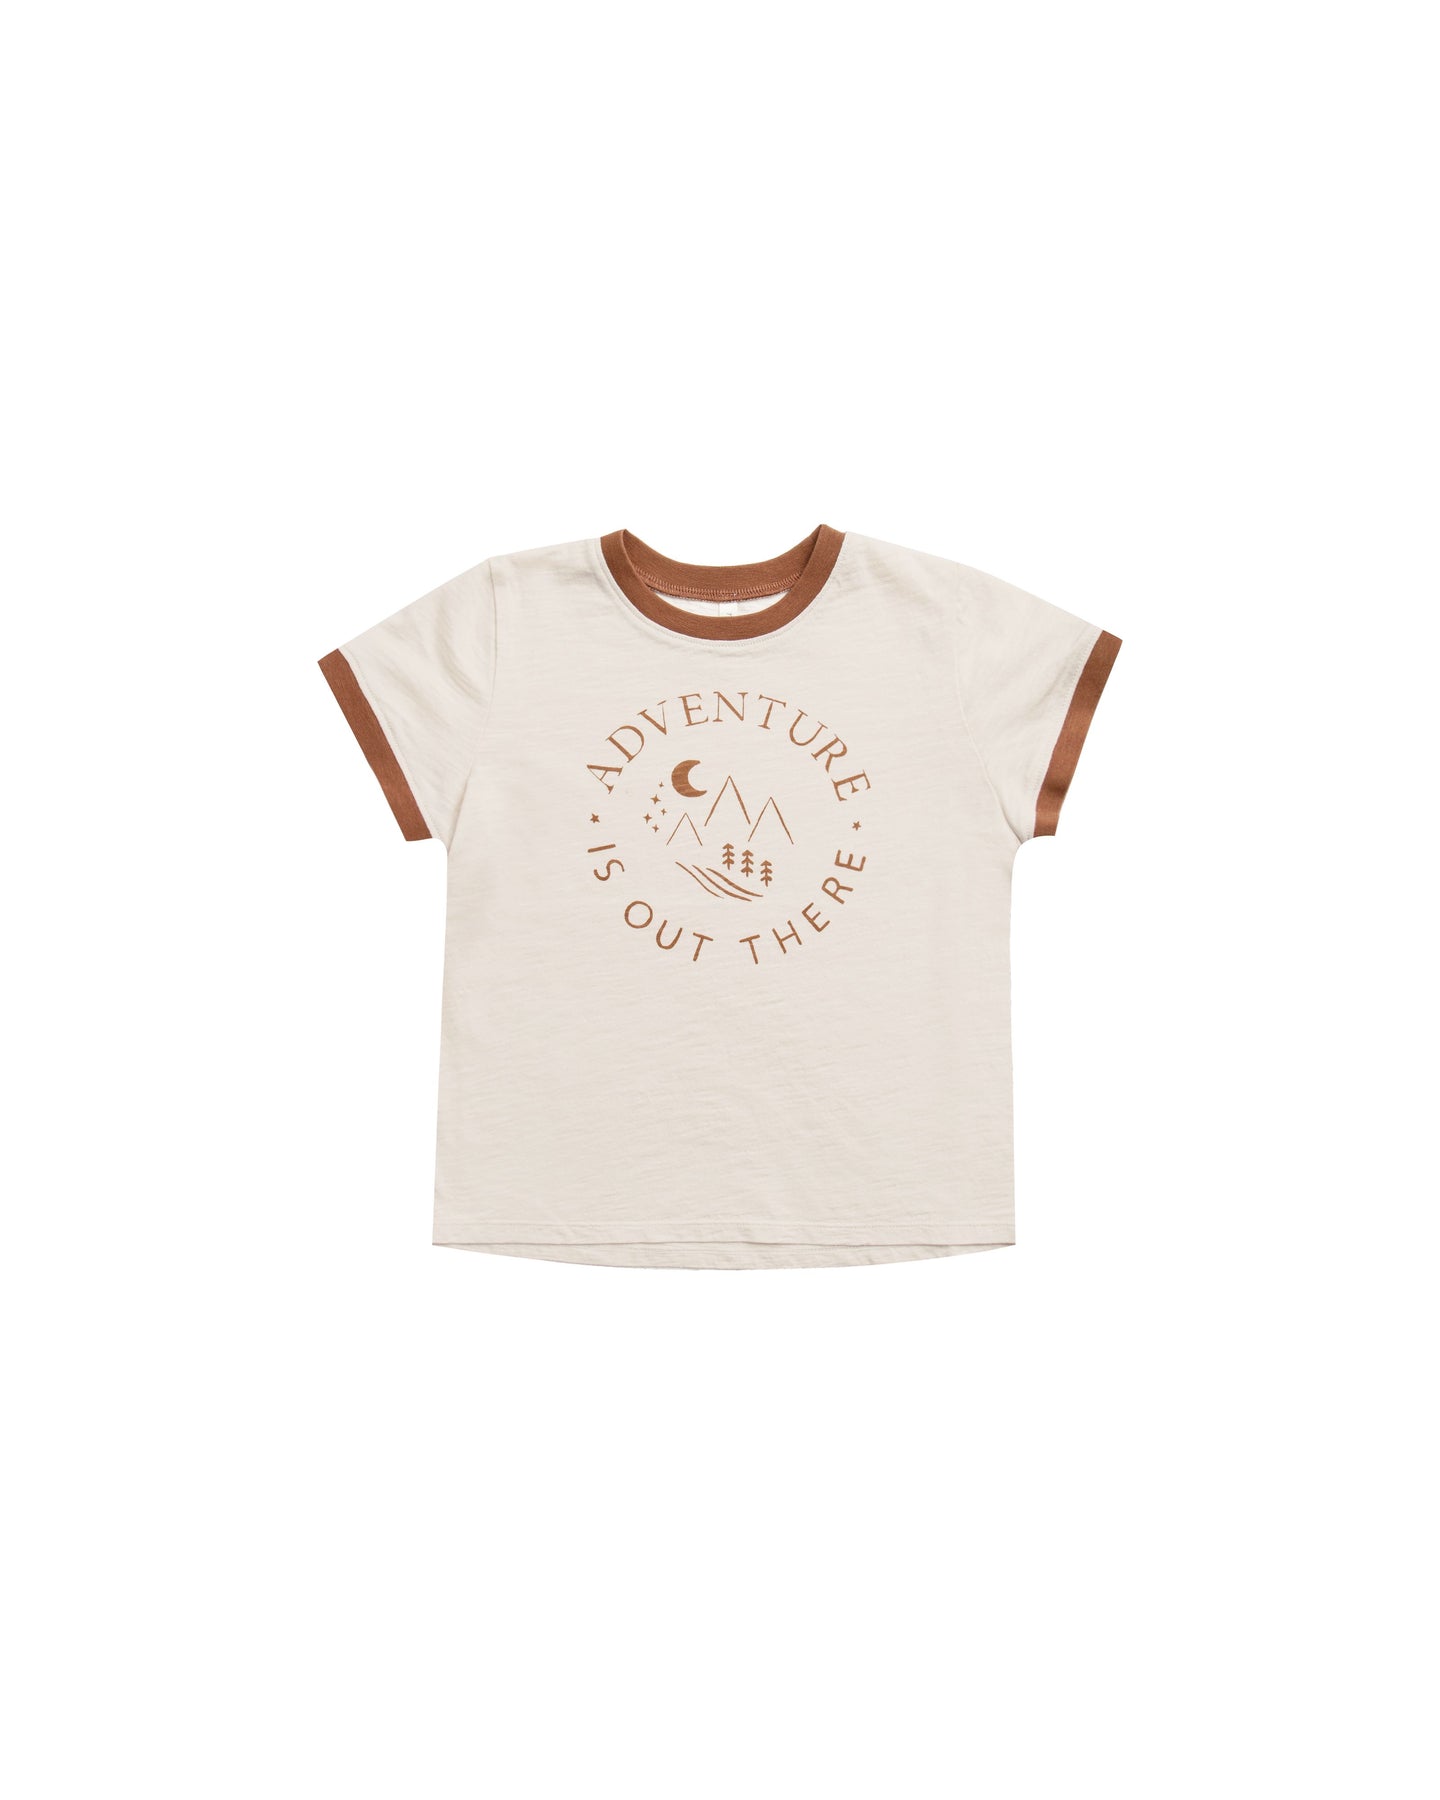 Rylee + Cru - Adventure is Out There Ringer Tee - Rust